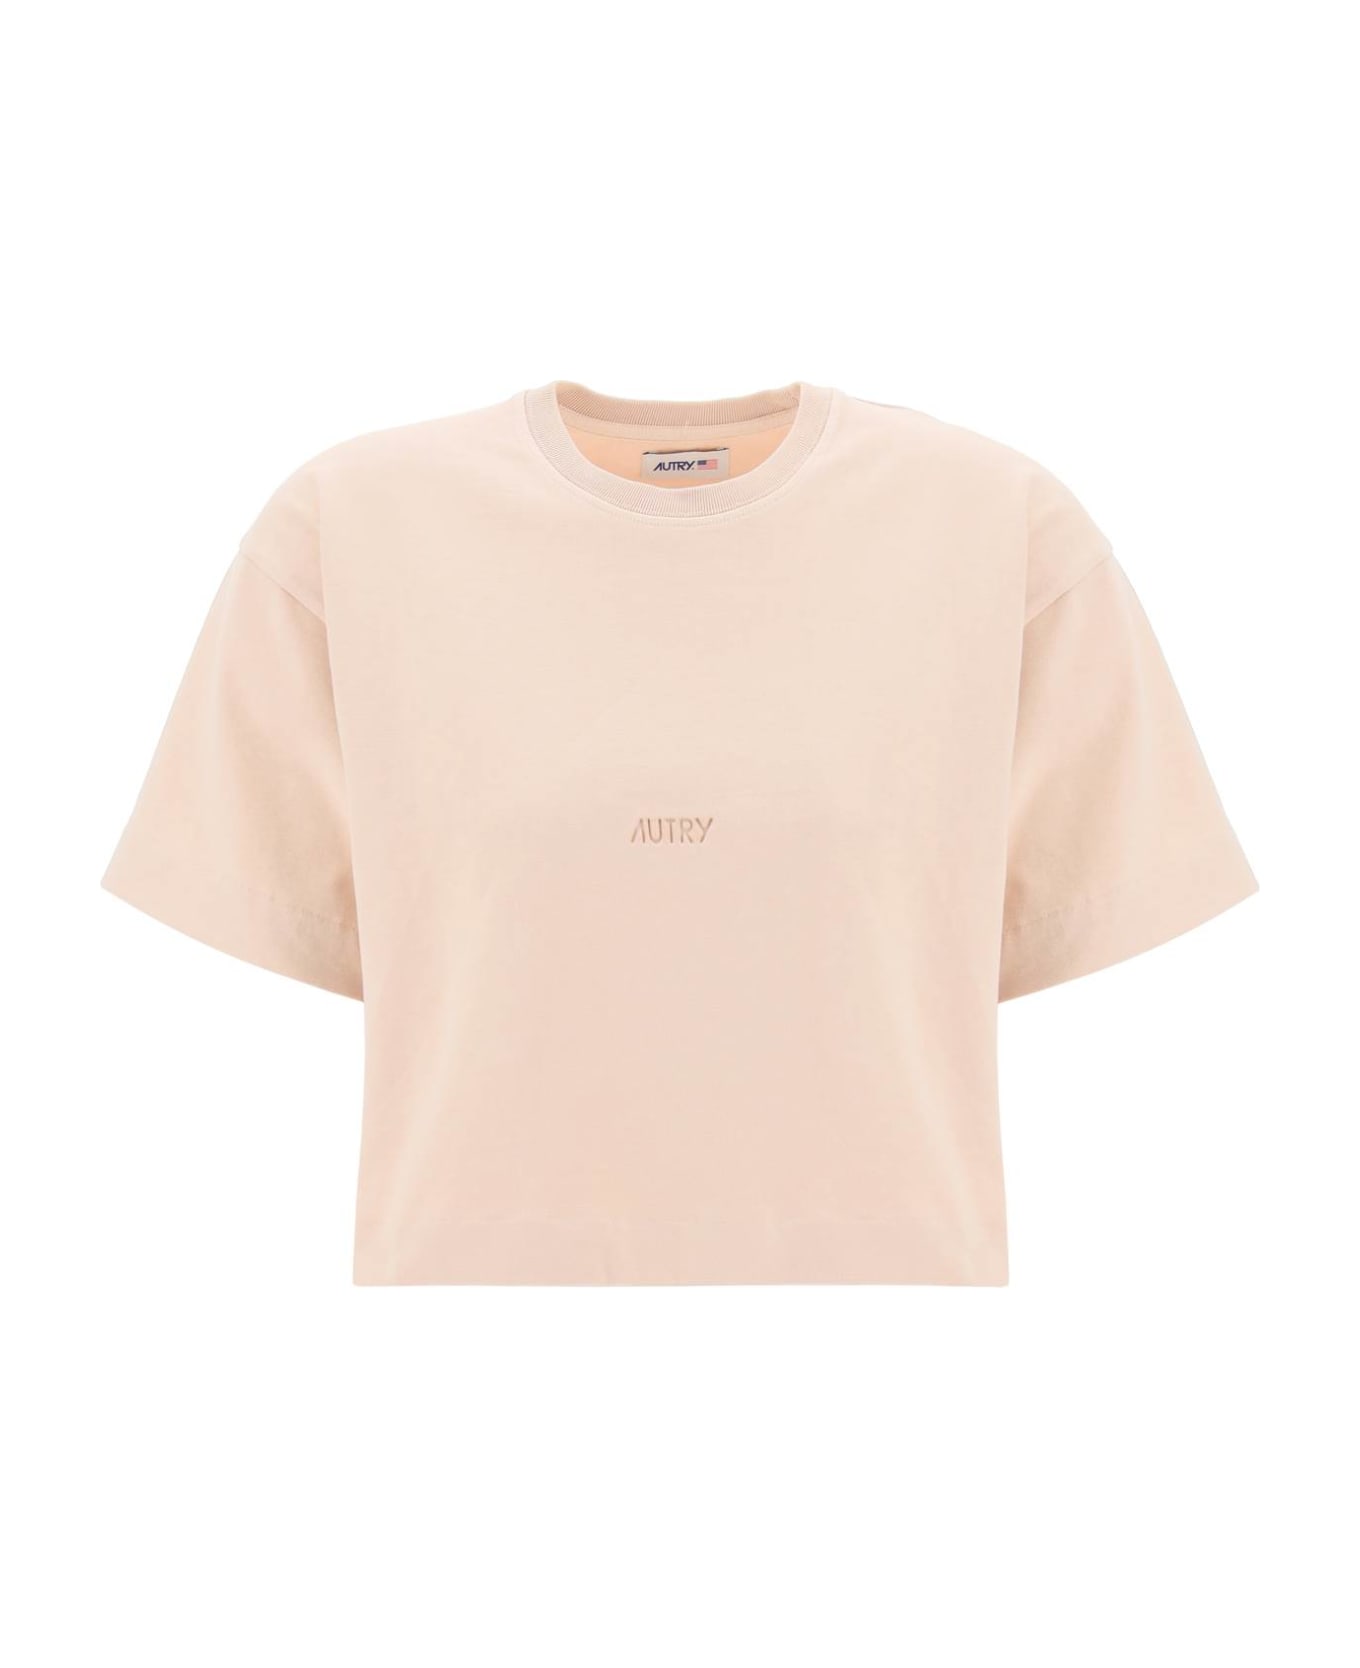 Autry Cotton T-shirt With Logo - PEONY ROSE (Pink)